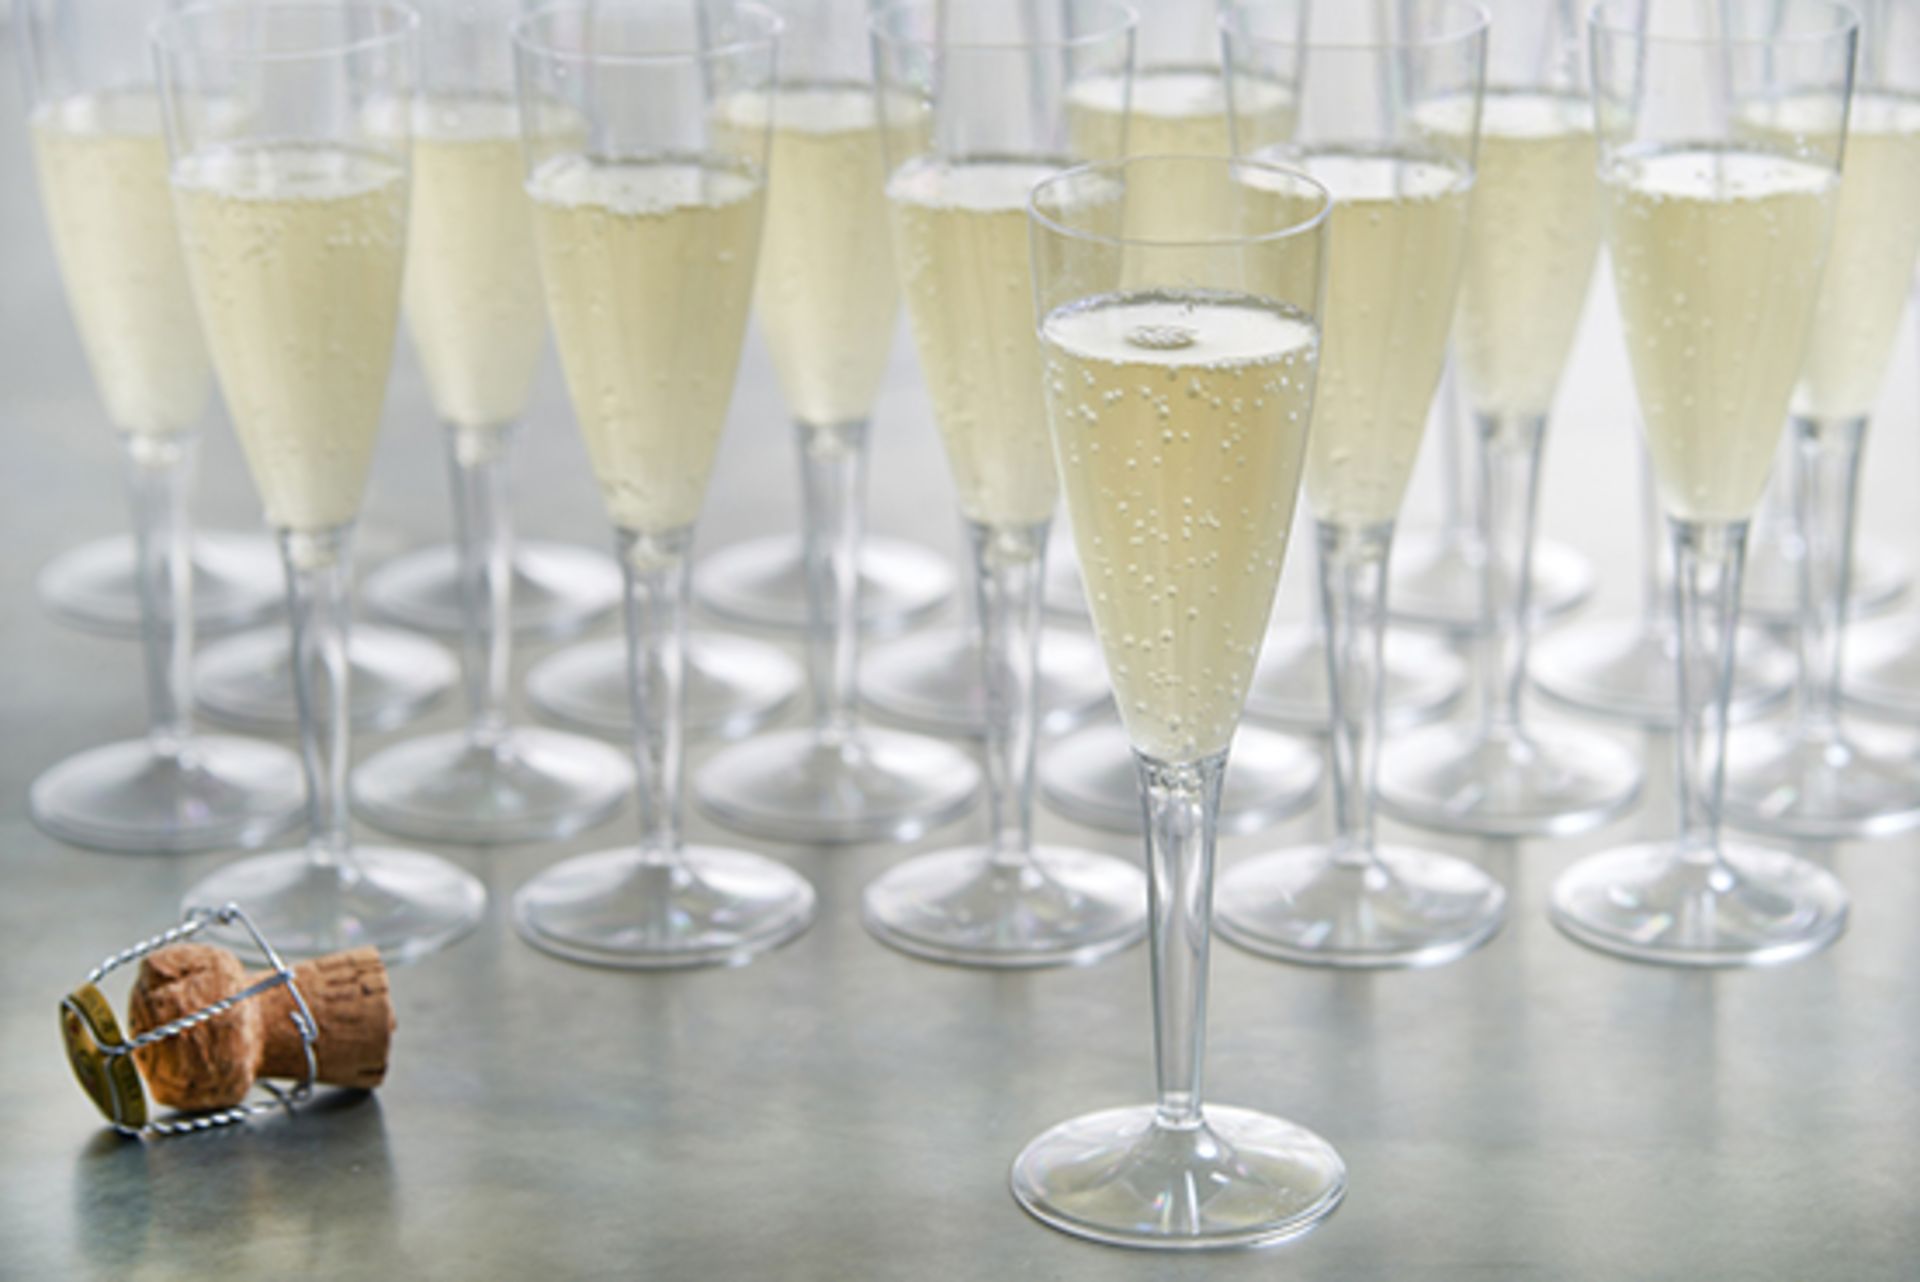 1,000 x Disposable Clear Plastic Champagne Flutes (170ml) - Brand: Remmerco CG111P - Brand New